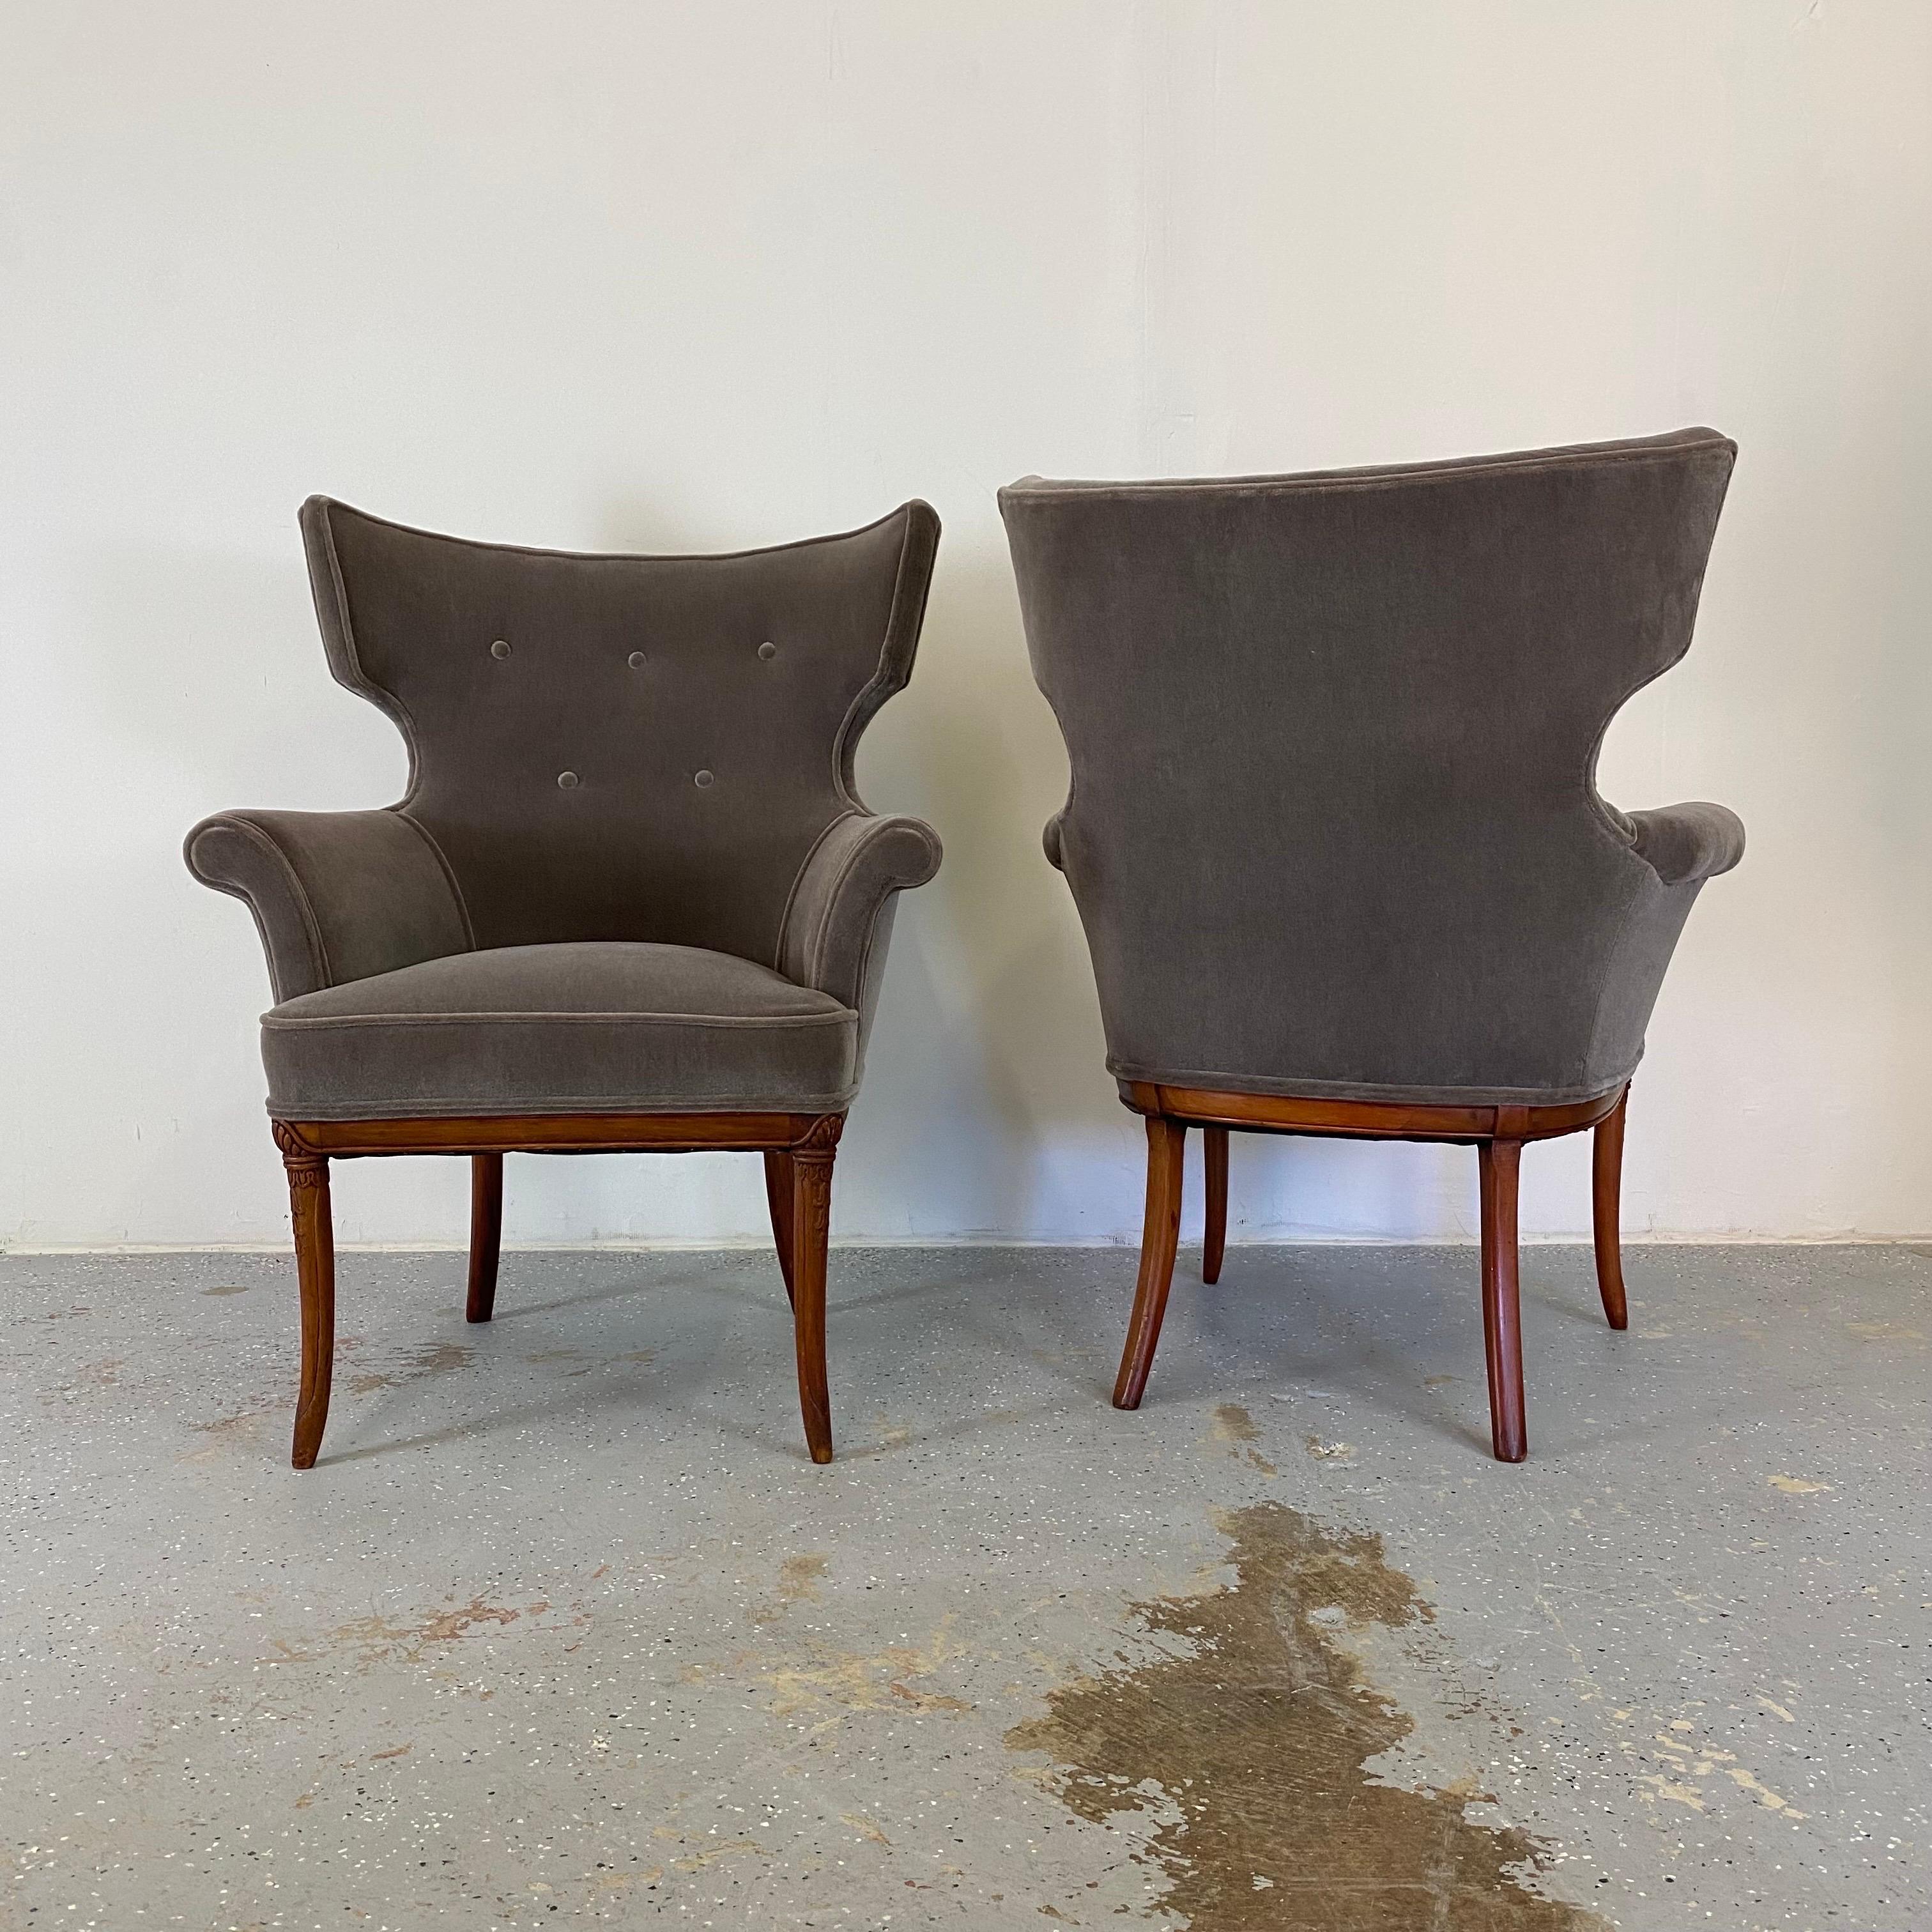 An elegant pair of antique wingback chairs. These have dramatic silhouettes with new mohair upholstery.